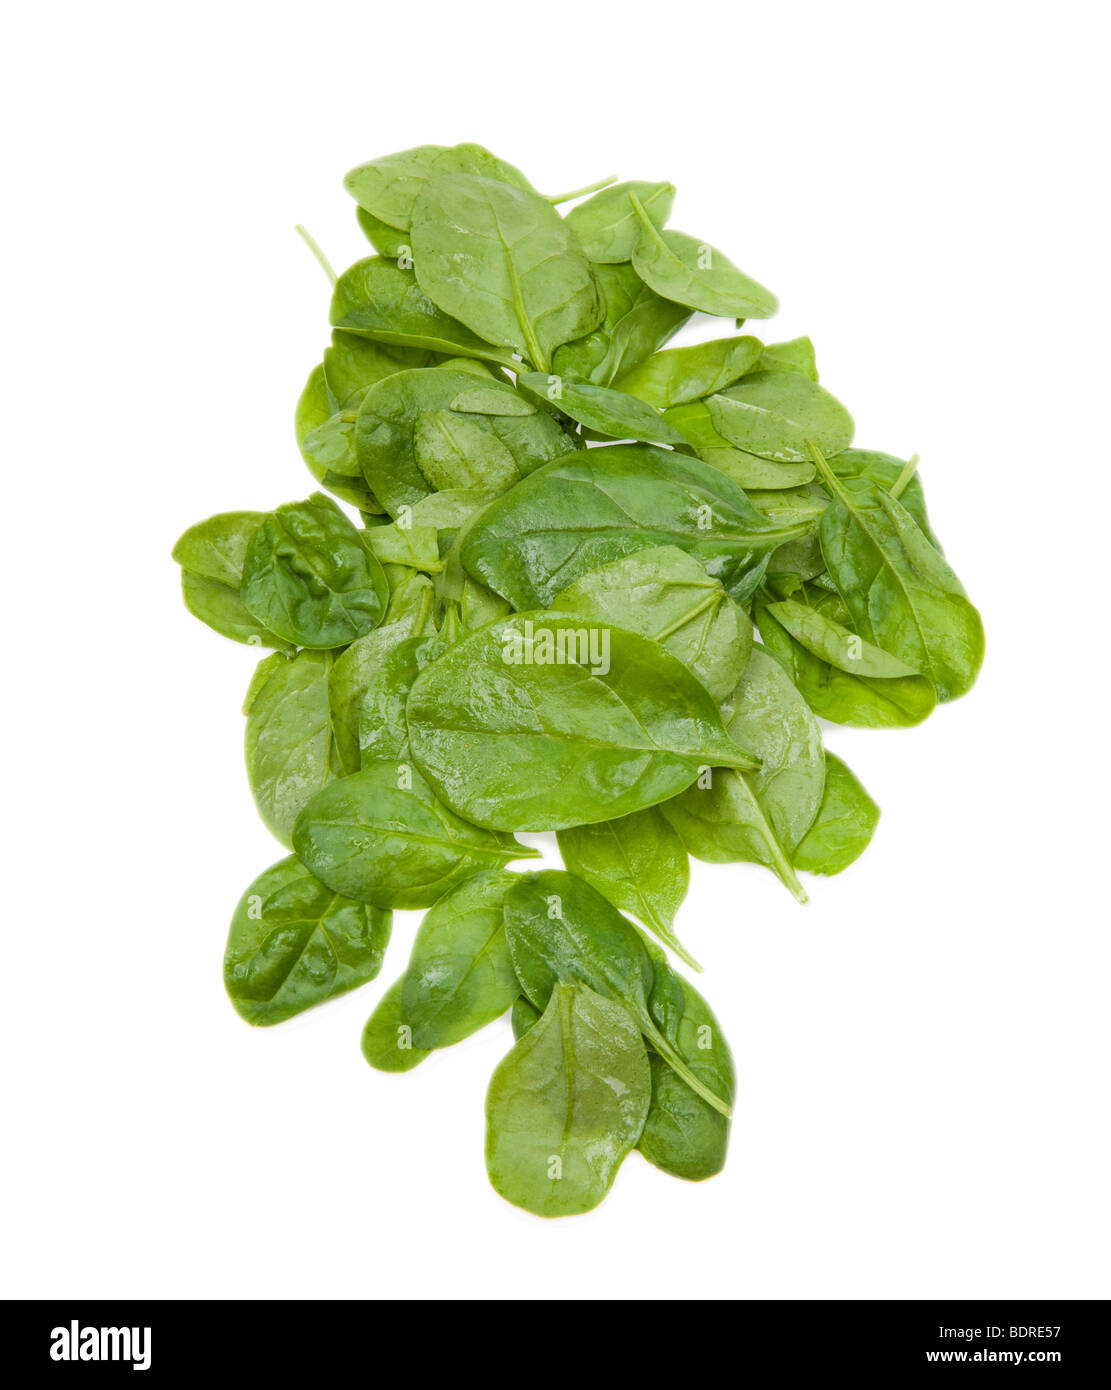 baby SPINACH single leaves salad cook cooking green greenfood food pack packed plastic folie film spinat vegetables veggi fresh Stock Photo